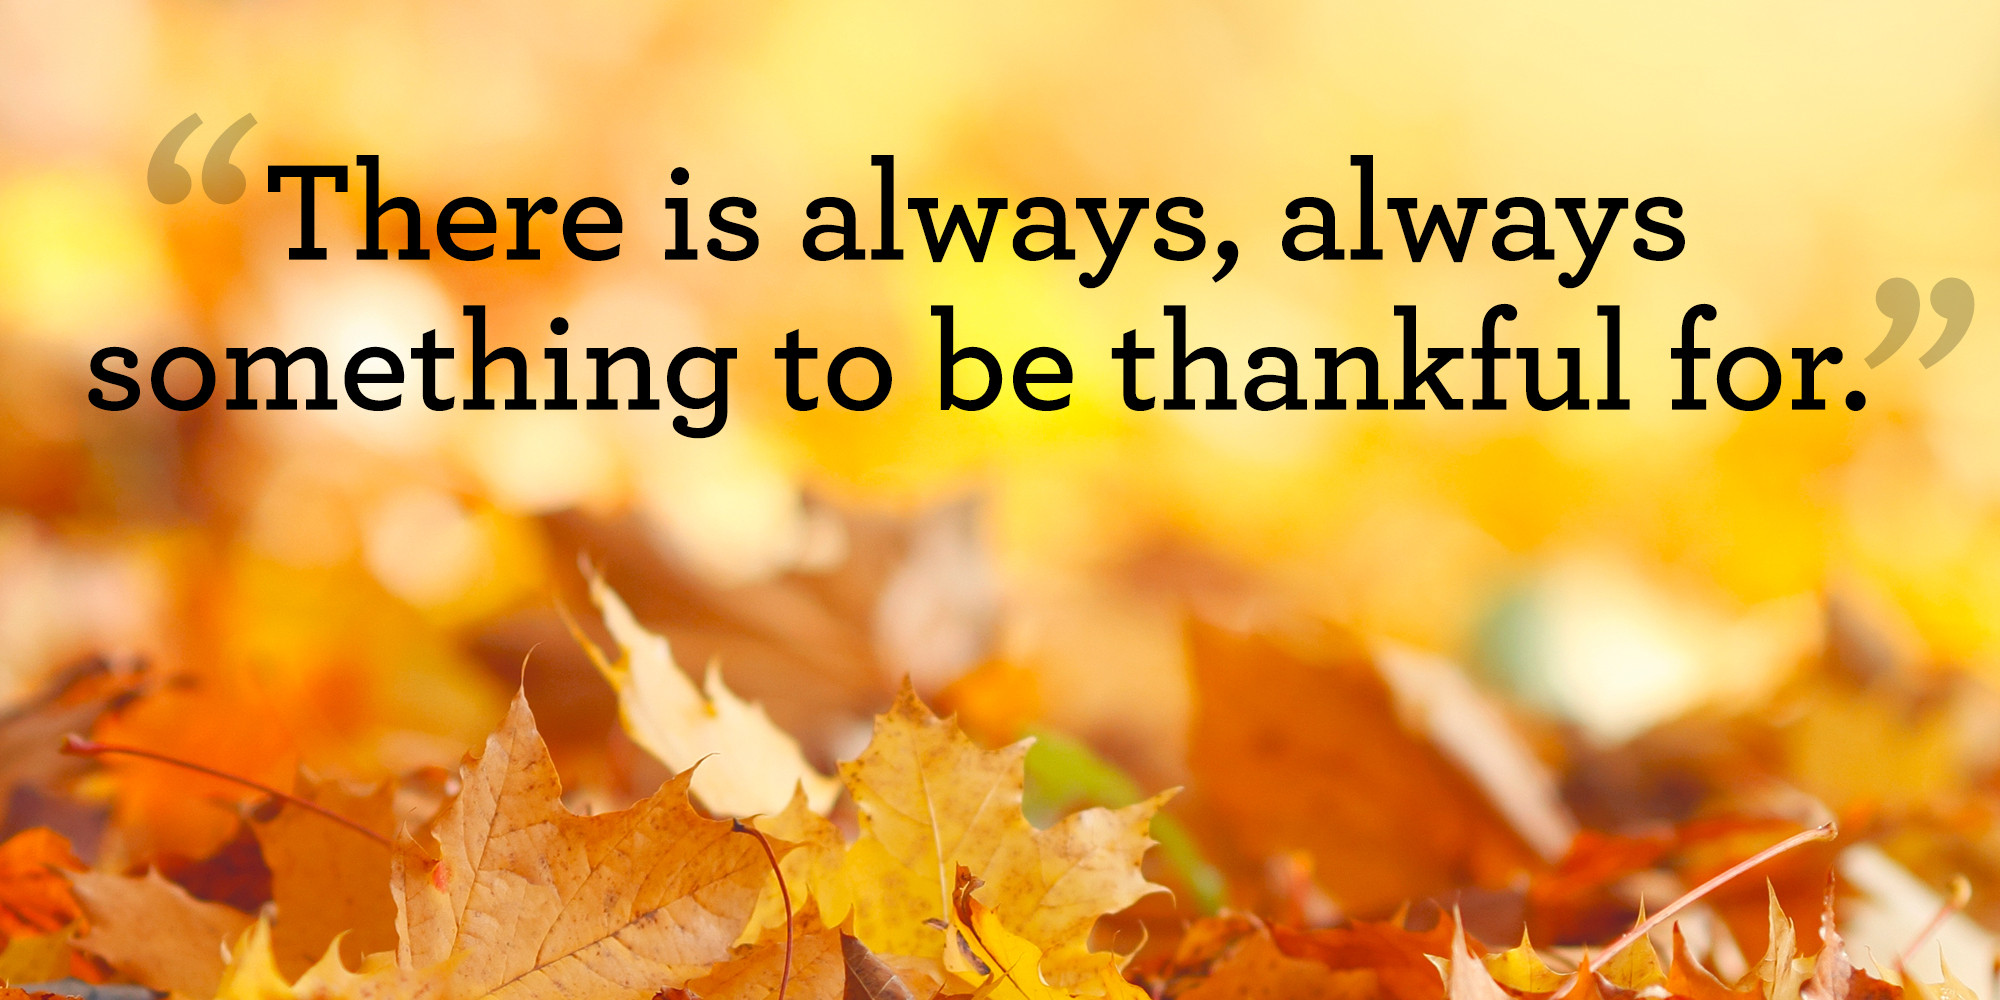 Quotes Of Thanksgiving
 10 Best Thanksgiving Quotes Meaningful Thanksgiving Sayings